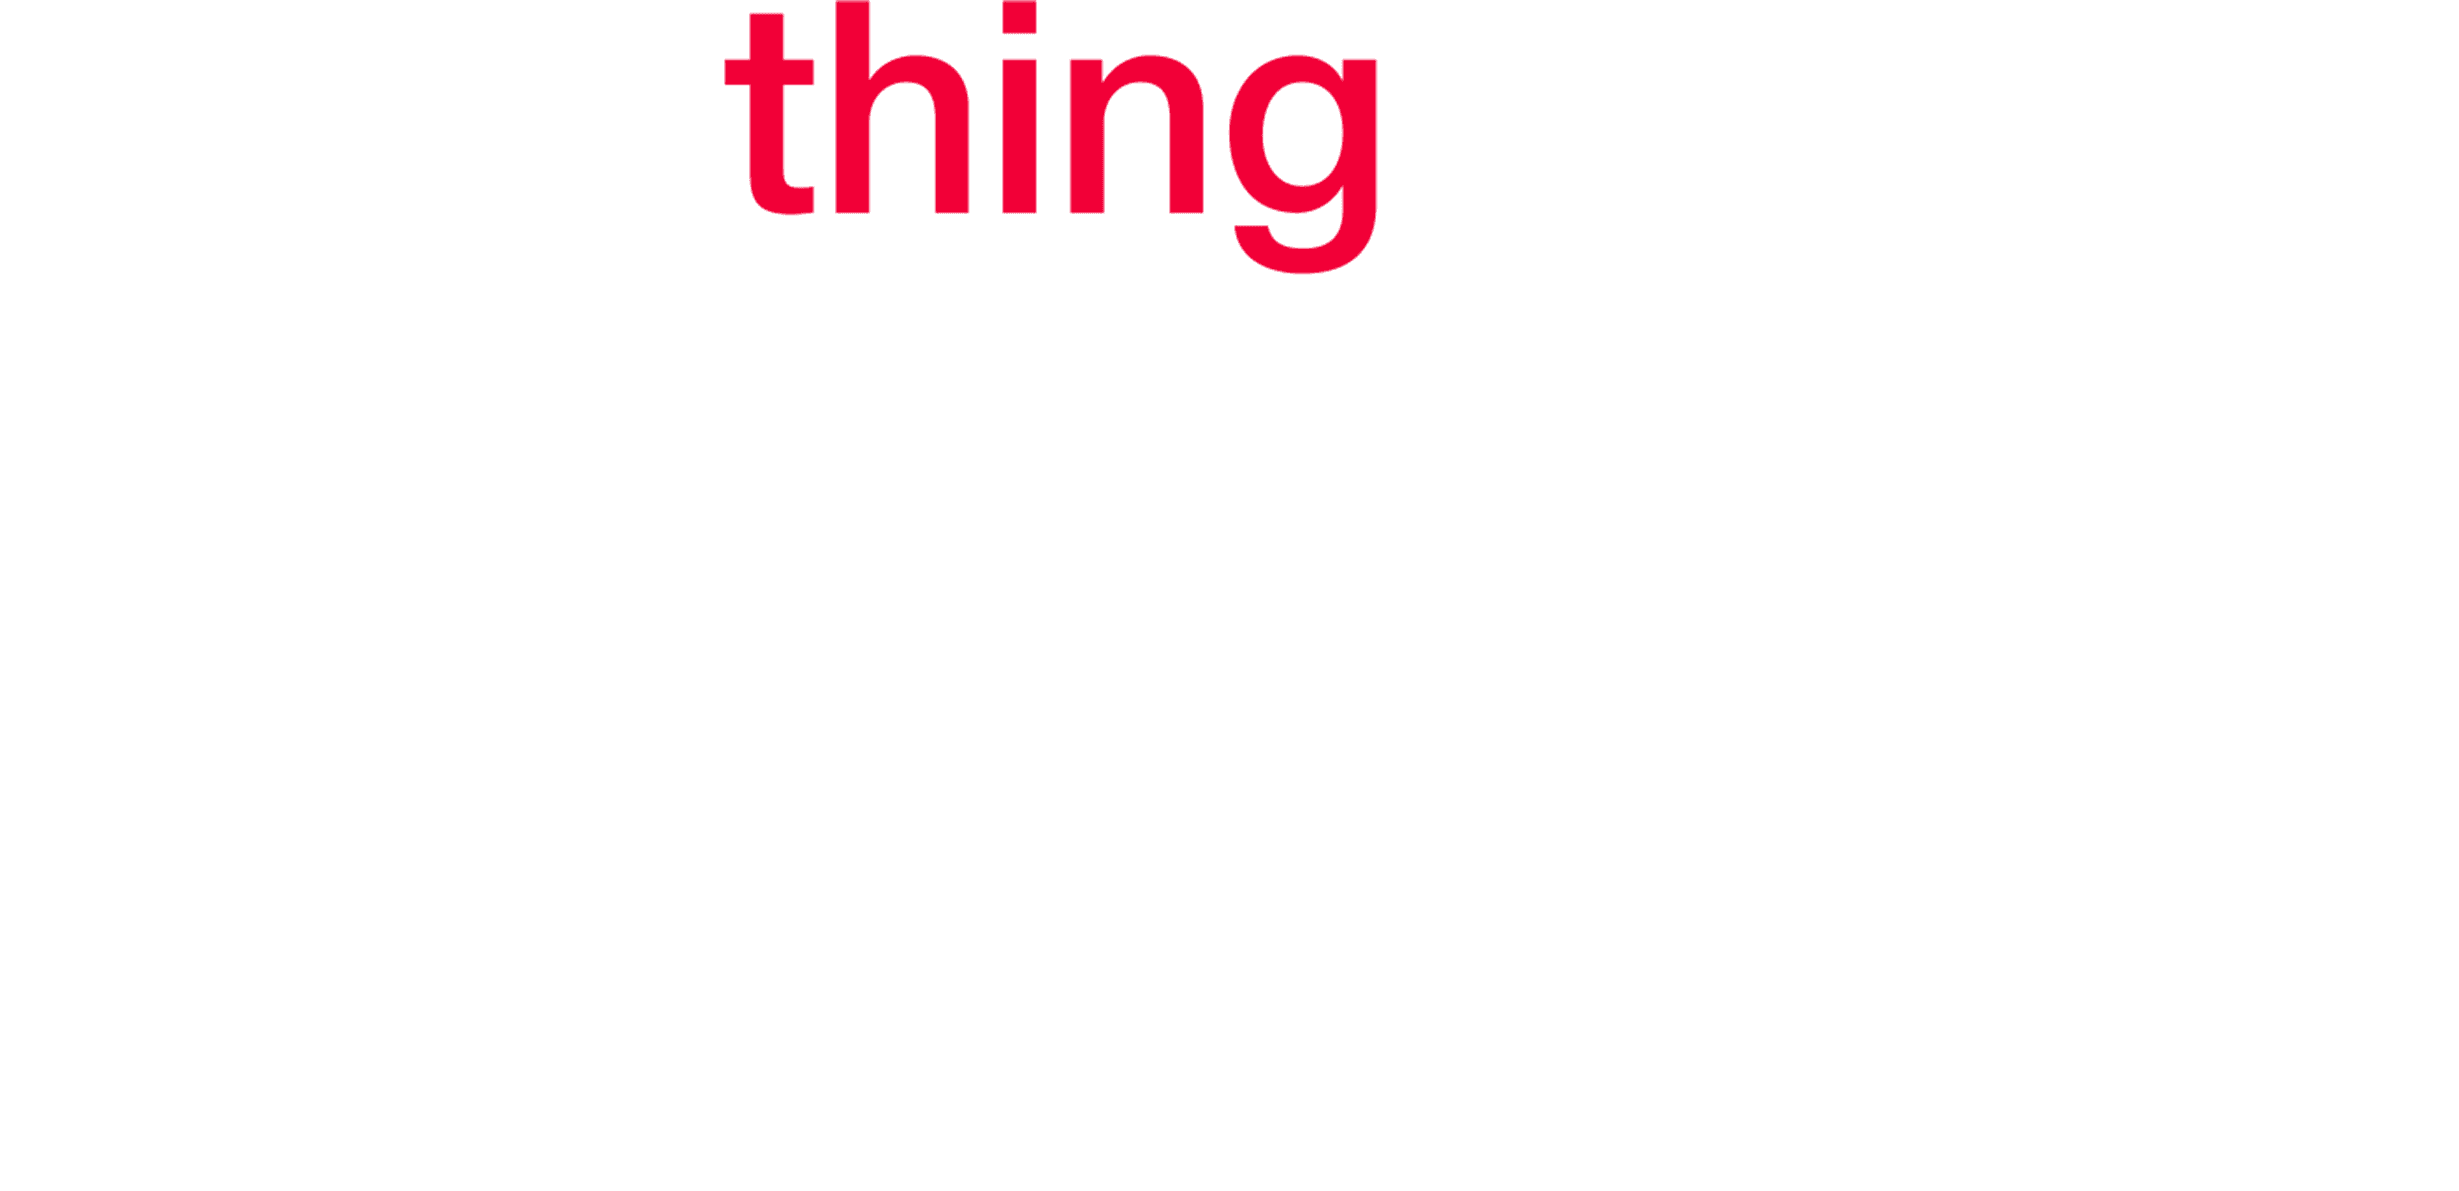 The Thing About Harry logo